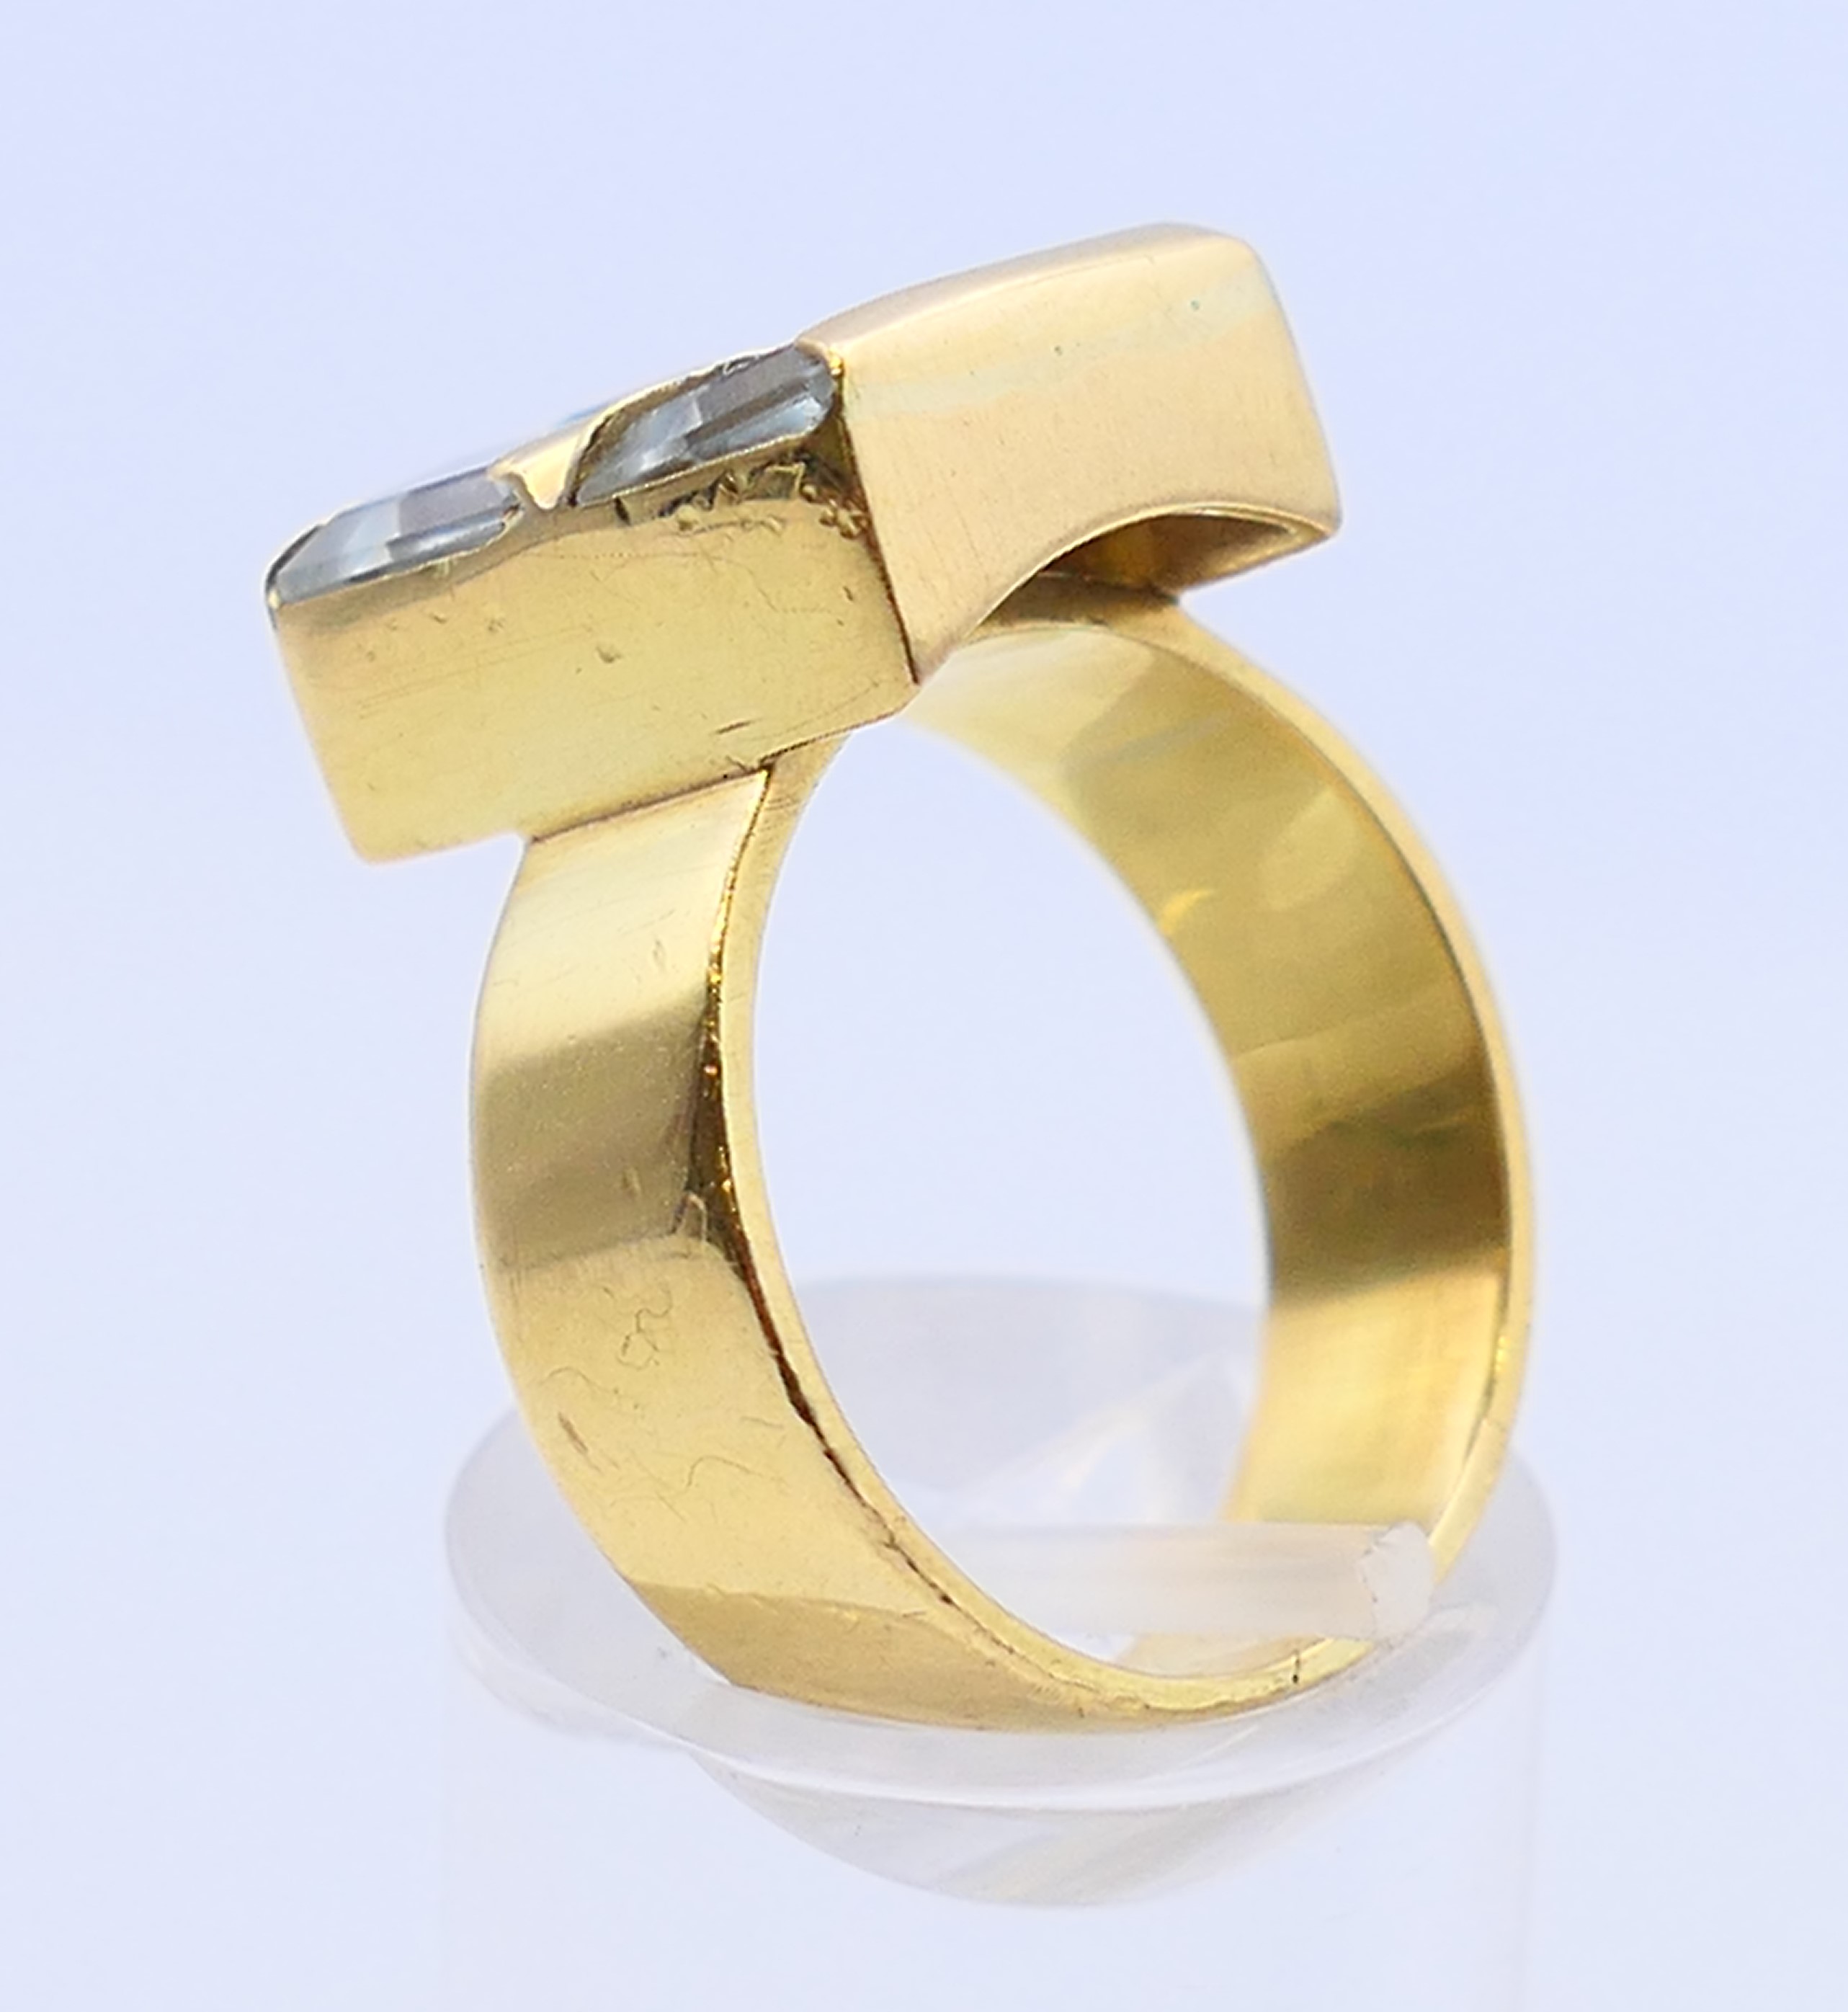 An 18 ct gold, aquamarine four stone ring, the emerald cut aquamarines 6 x 5mm x 3.9mm. Ring size O. - Image 5 of 7